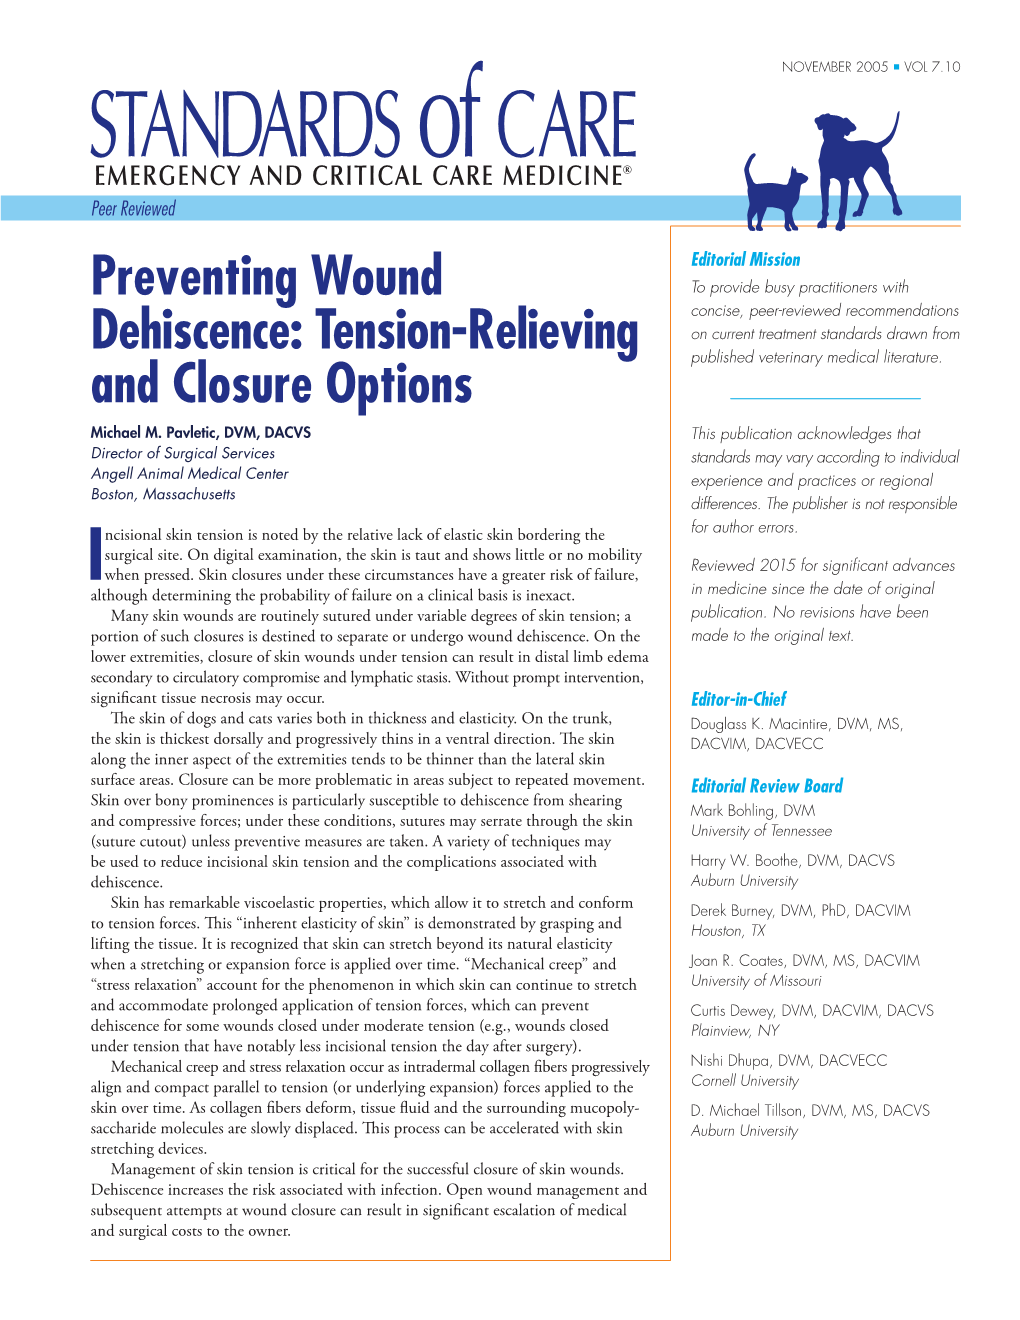 Preventing Wound Dehiscence: Tension-Relieving and Closure